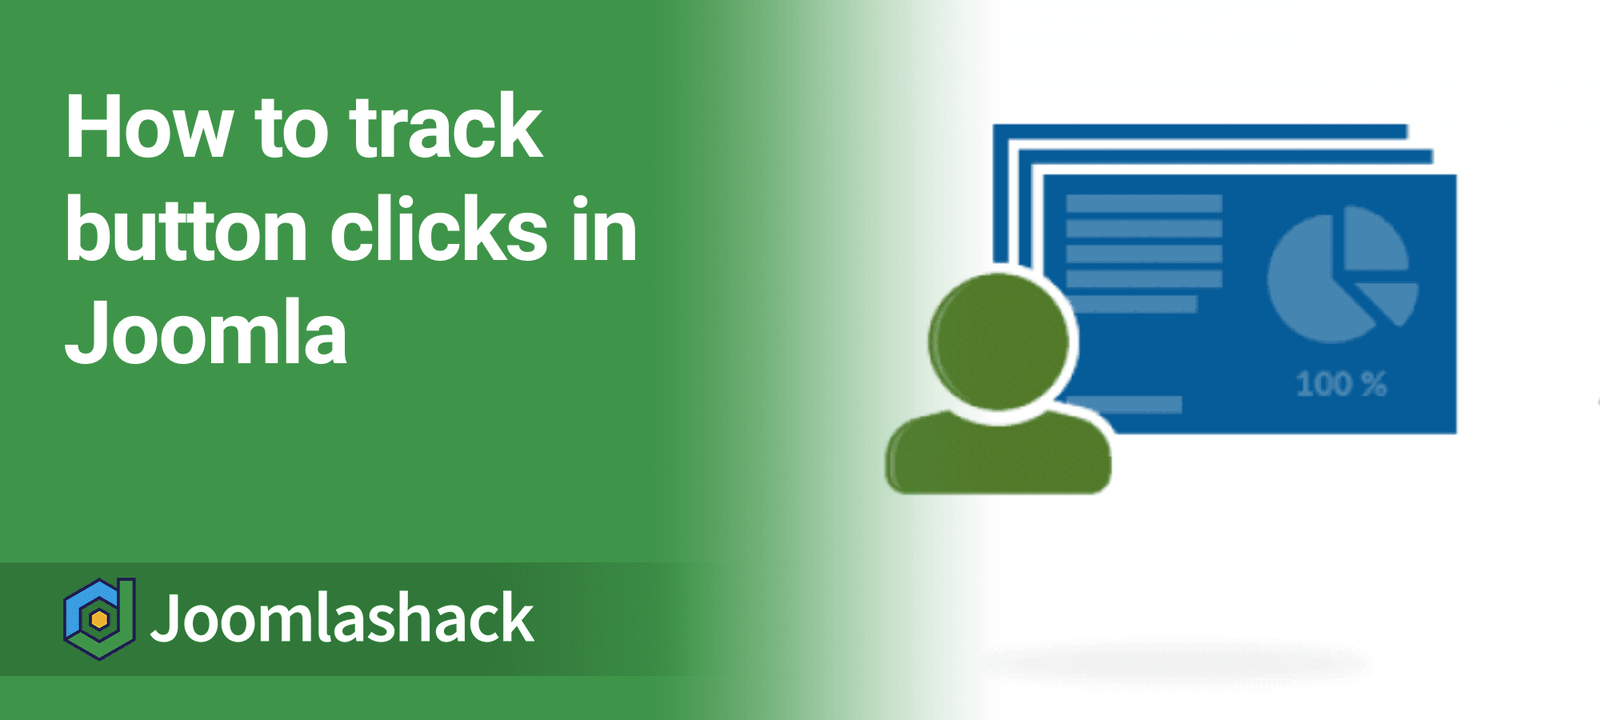 How to Track Button Clicks in Joomla with Shack Analytics Pro